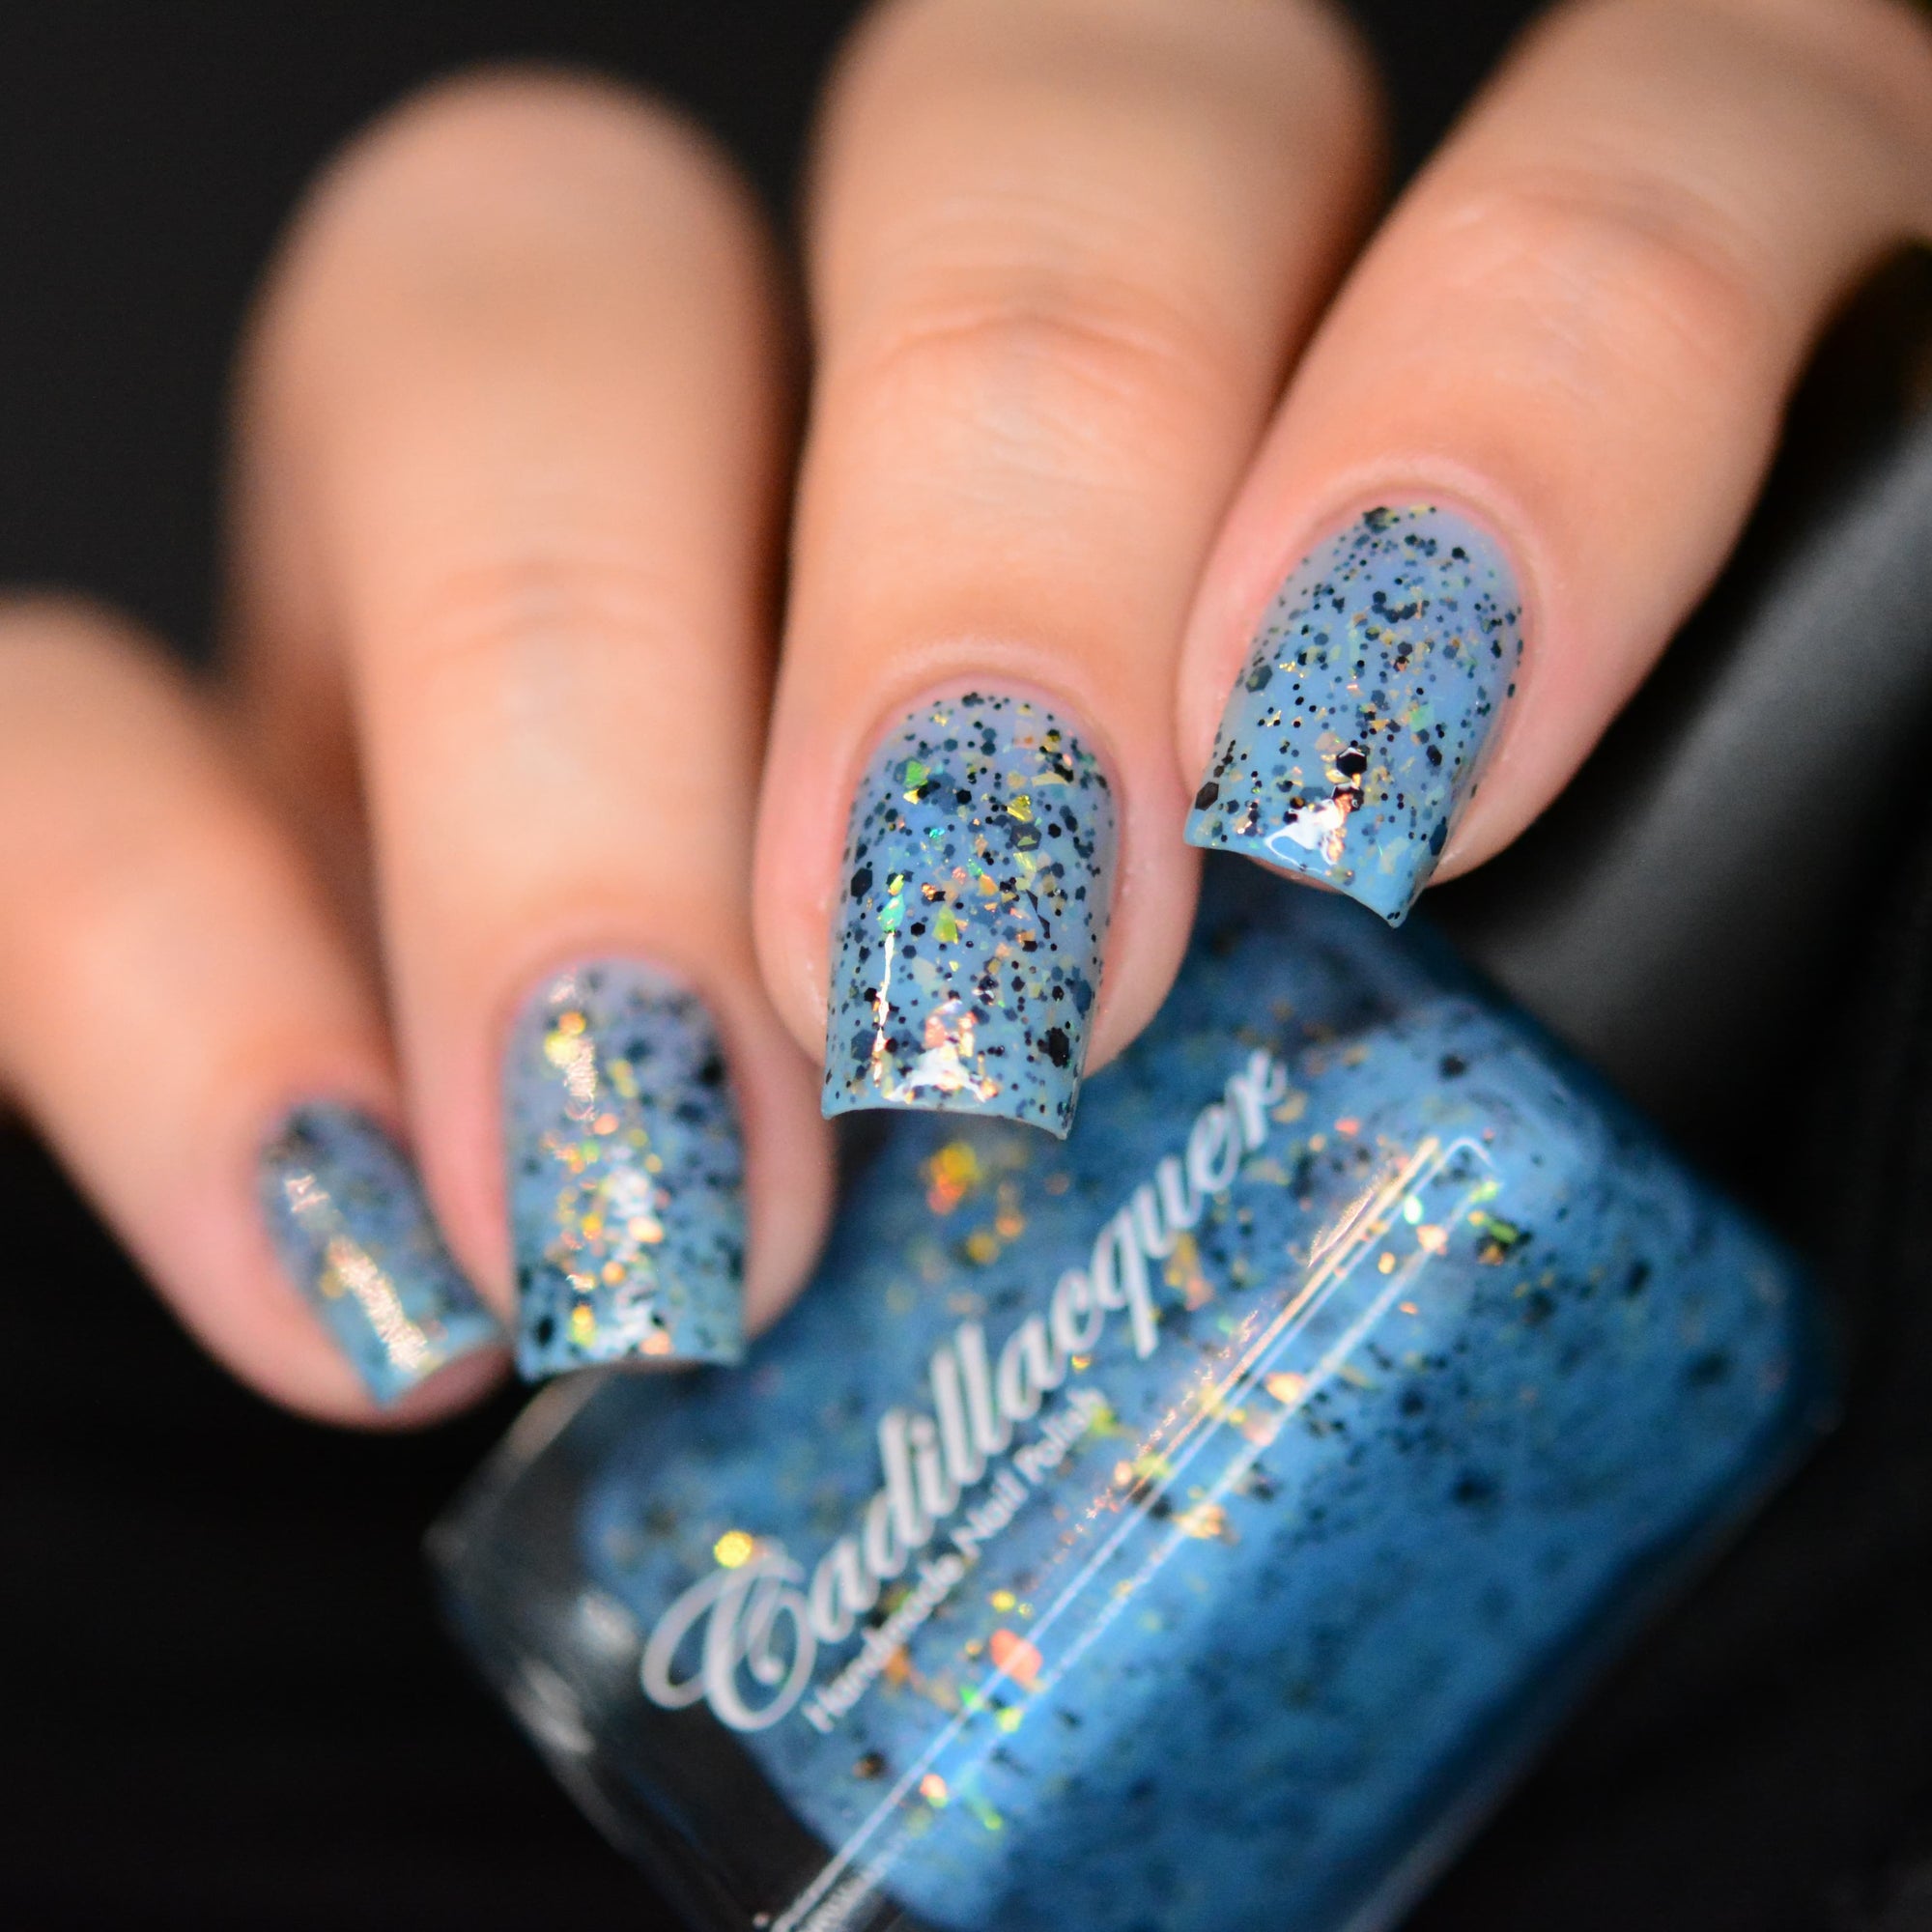 Cadillacquer - Winter 2022 - Calm Before The Storm